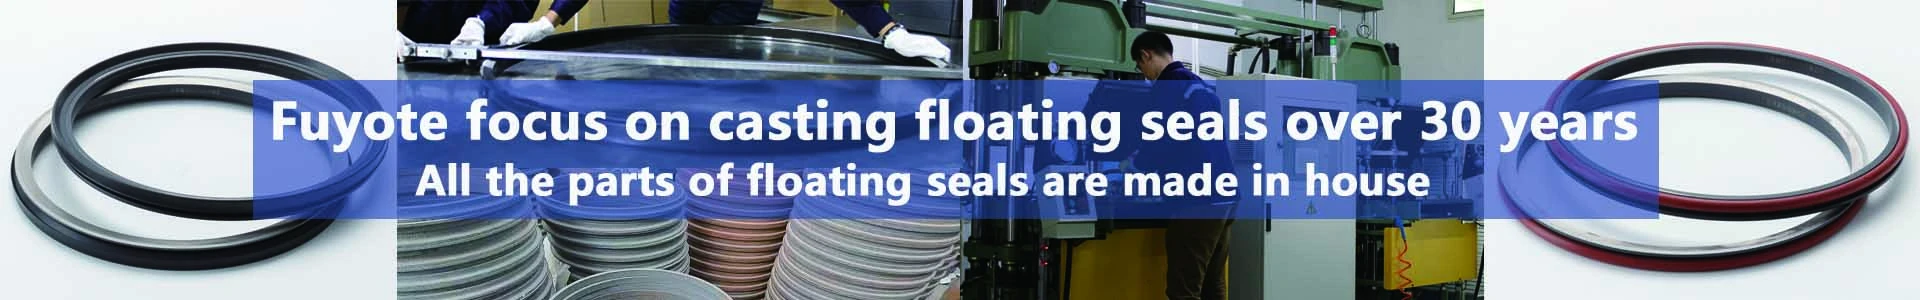 Construction Machinery Floating Seals